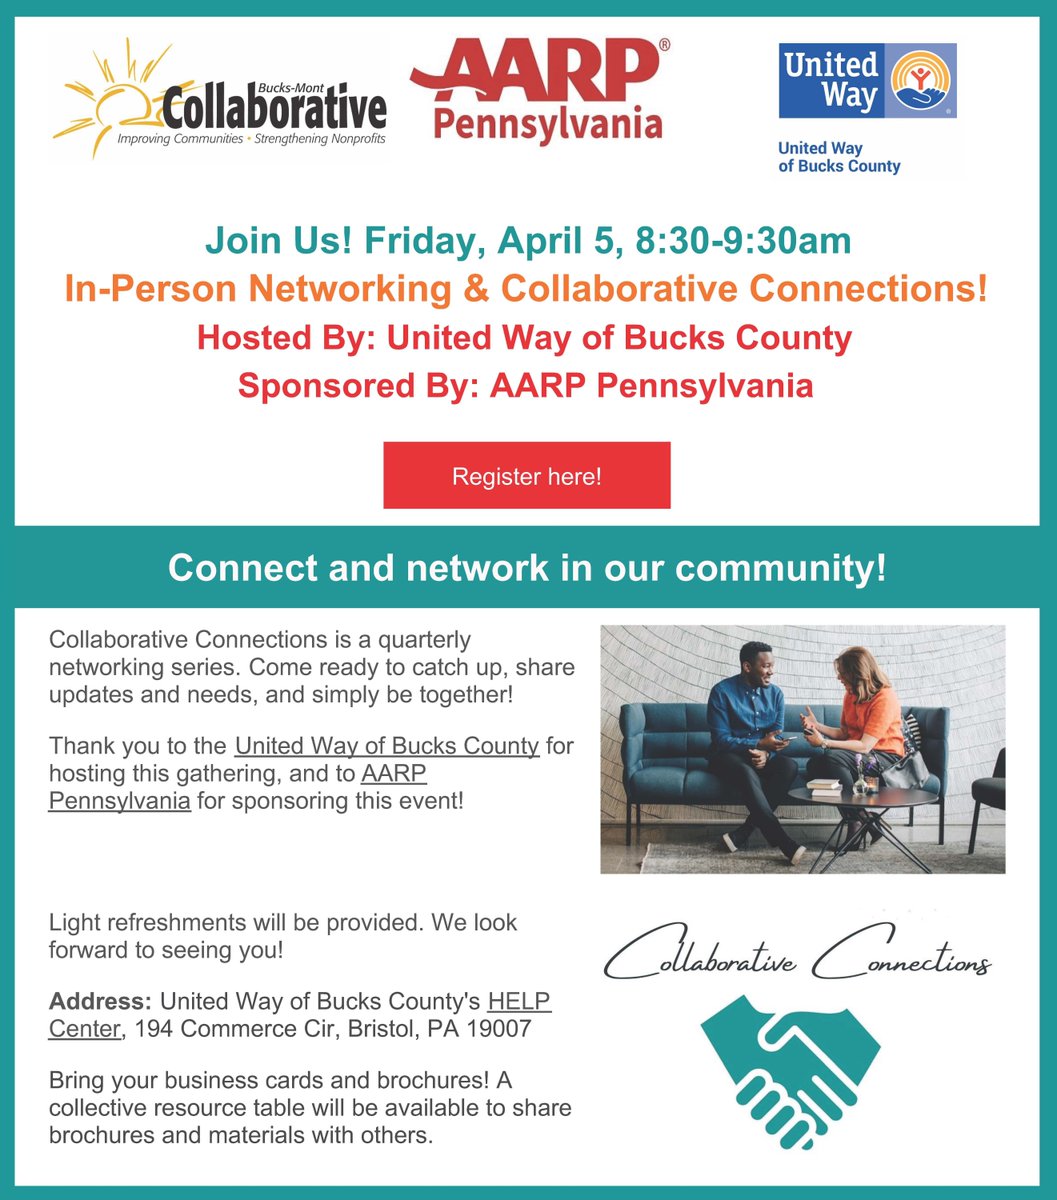 Join us at the #HELPCenterBucks for In-Person Networking & Collaborative Connections! Collaborative Connections is a quarterly networking series with the @BucksMontCollab. Come ready to catch up, share updates and needs, and simply be together! buff.ly/3IERwdA